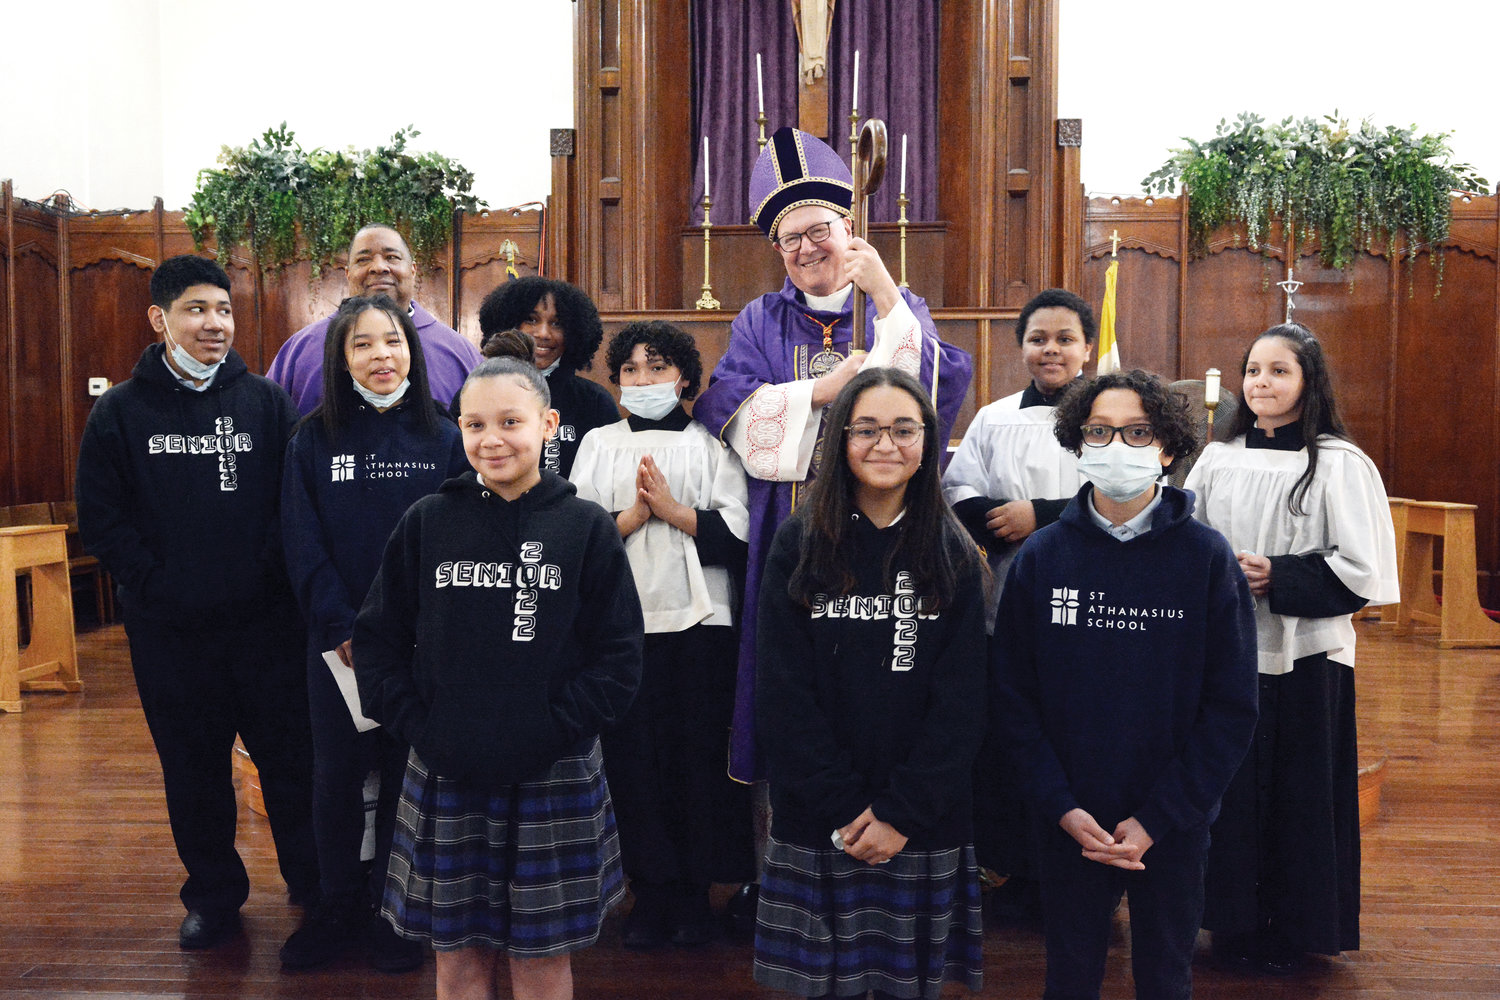 Students who assisted with the liturgy posed for a photo with the cardinal and Father Jose Rivas, pastor of St. Athanasius.